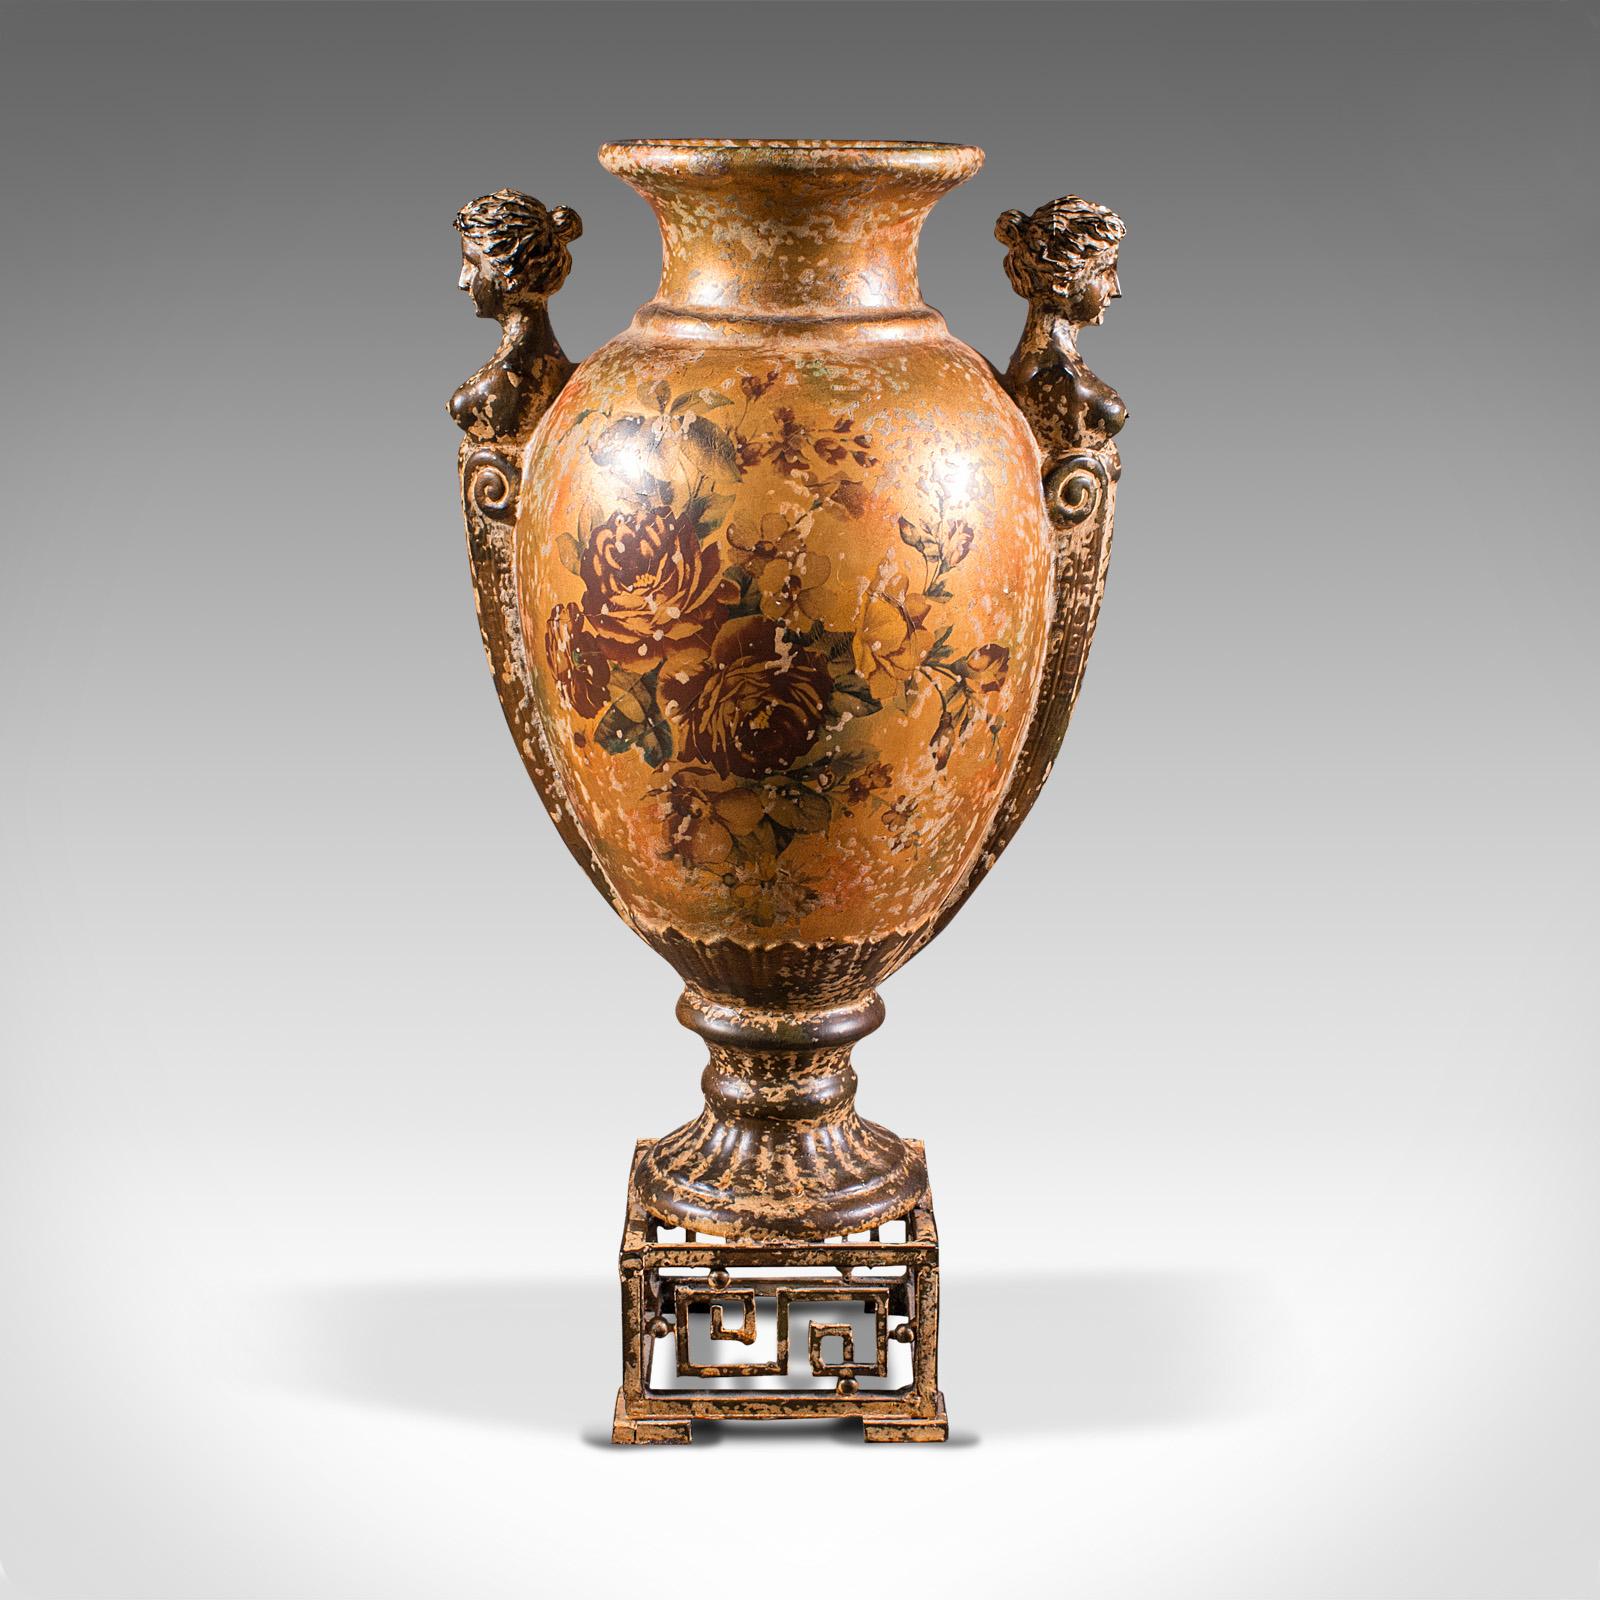 This is a tall vintage decorative vase. An Oriental, ceramic baluster urn with Italianate taste, dating to the late 20th century, circa 1970.

Dashing gilt finish and pleasing form
Displays a desirable aged patina
Gilt painted ceramic,